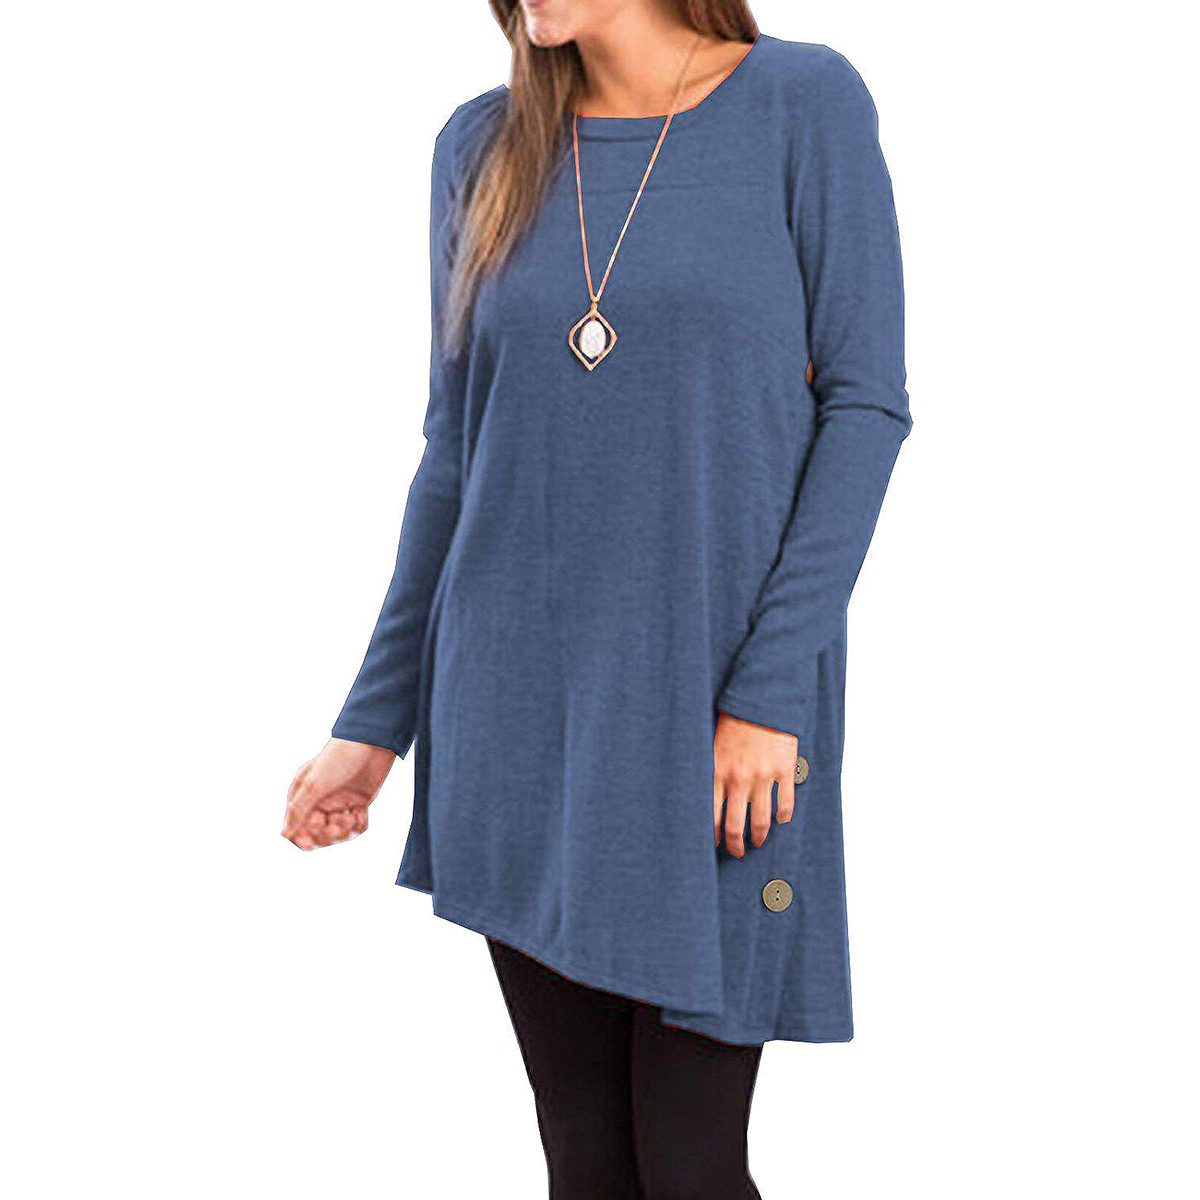 This Tunic Has Nearly 2,000 Reviews and the Most Adorable Buttons ...